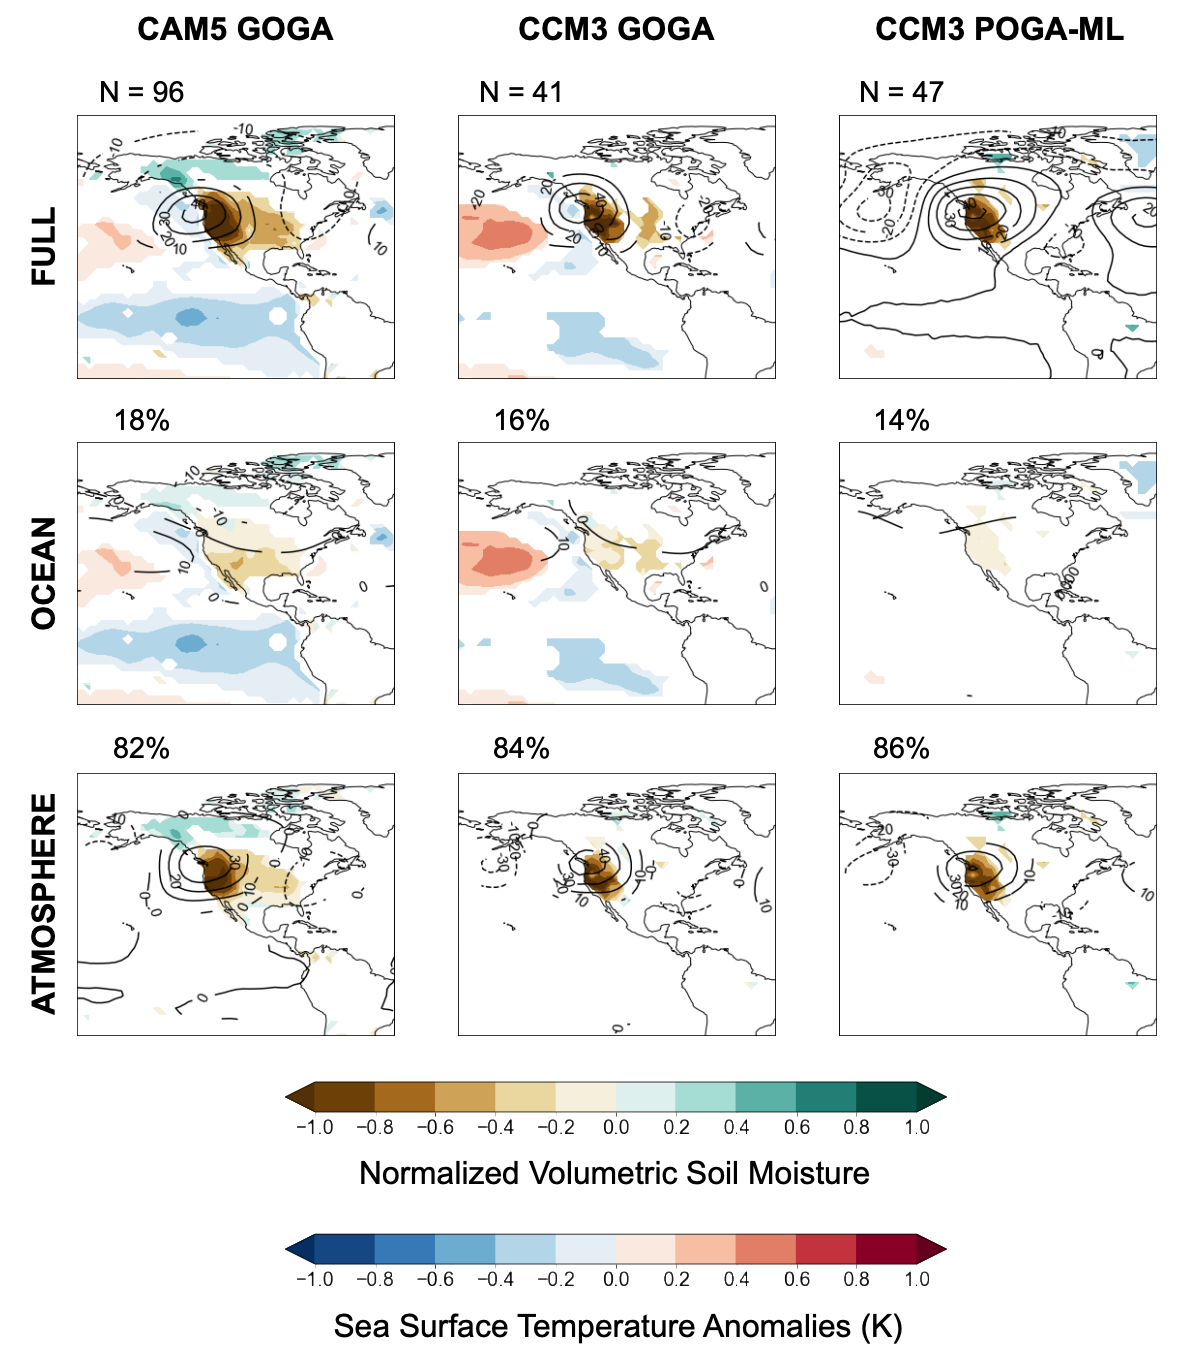 (top row) Composites of pan-coastal droughts defined by JJA soil moisture and their concurrent water year DJF SSTs and 500 mb height anomalies across the (left) CAM5 GOGA, (middle) CCM3 GOGA, and (right) CCM3 POGA-ML ensembles during 1856 – 2012. 